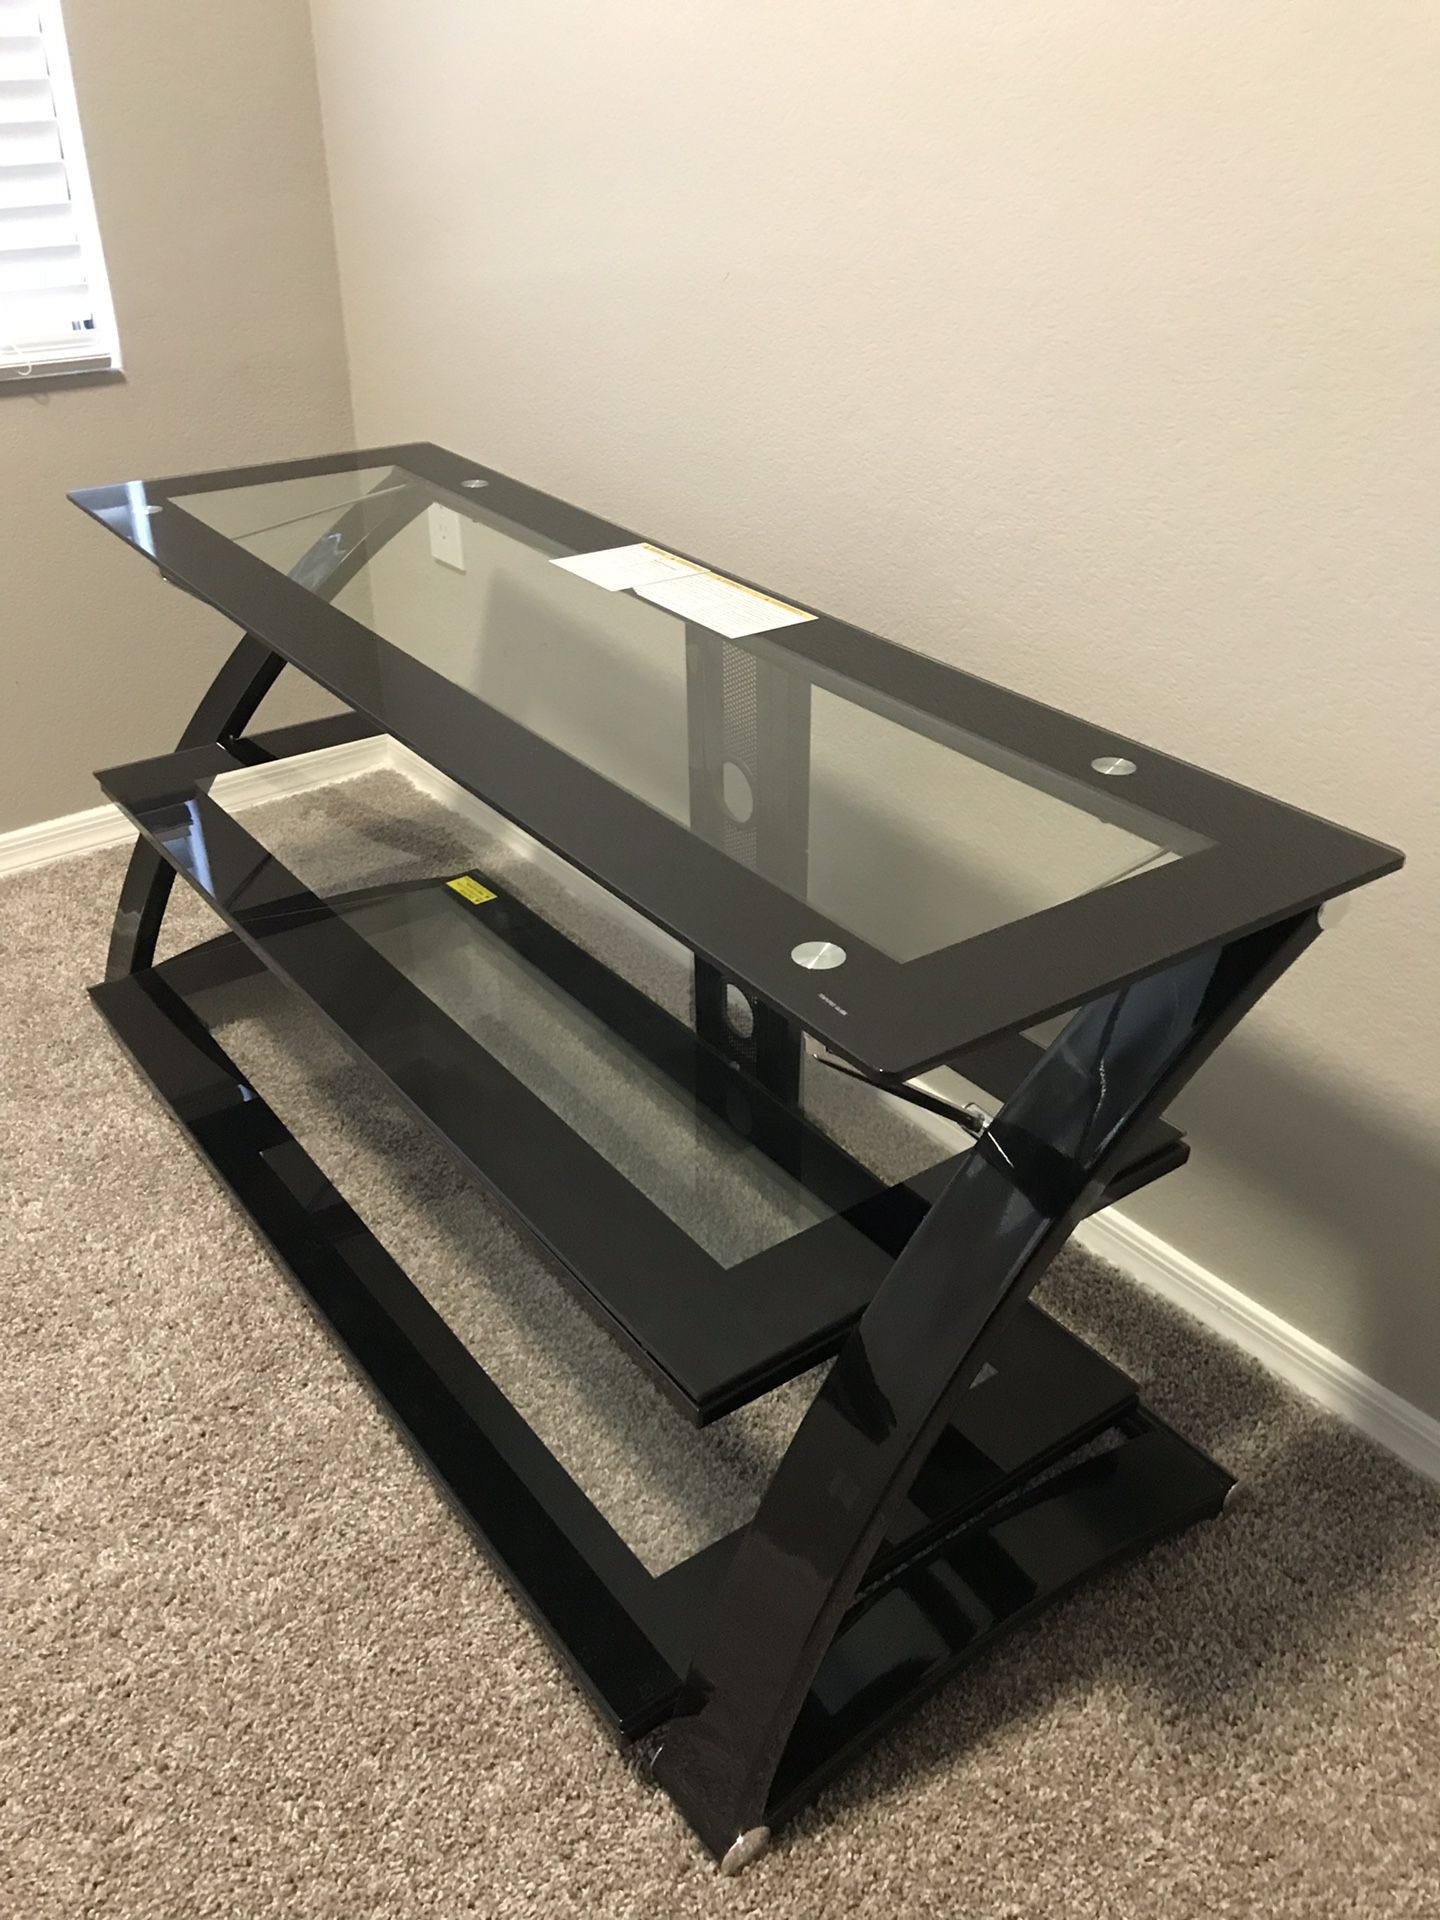 3-in-1 Flat Panel TV Stand with Swivel Mount for TVs up to 65"